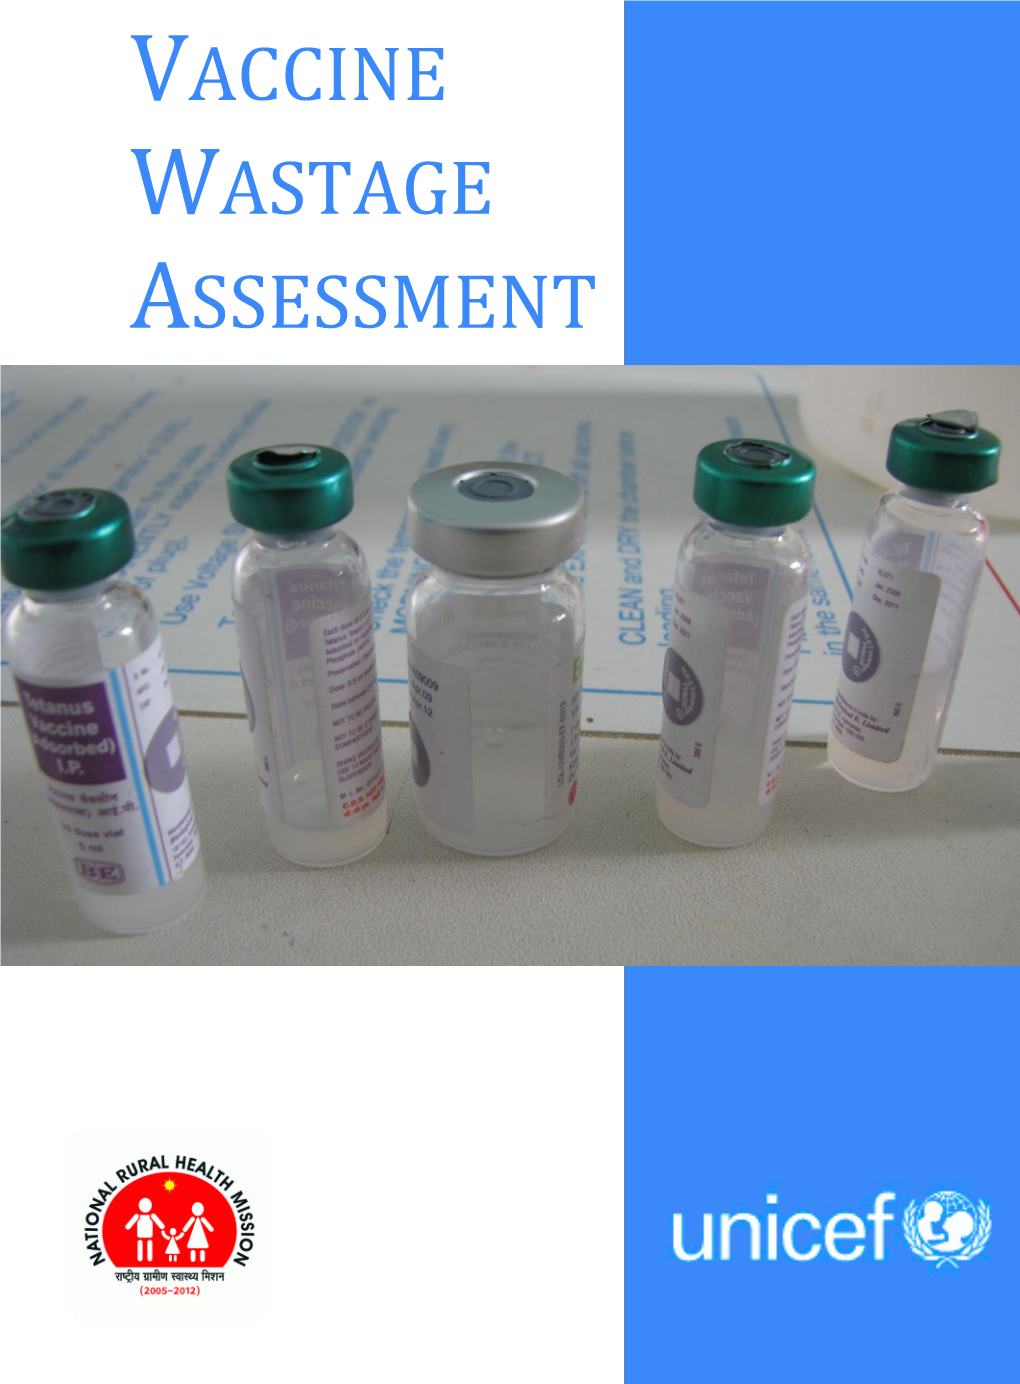 Vaccine Wastage Assessment